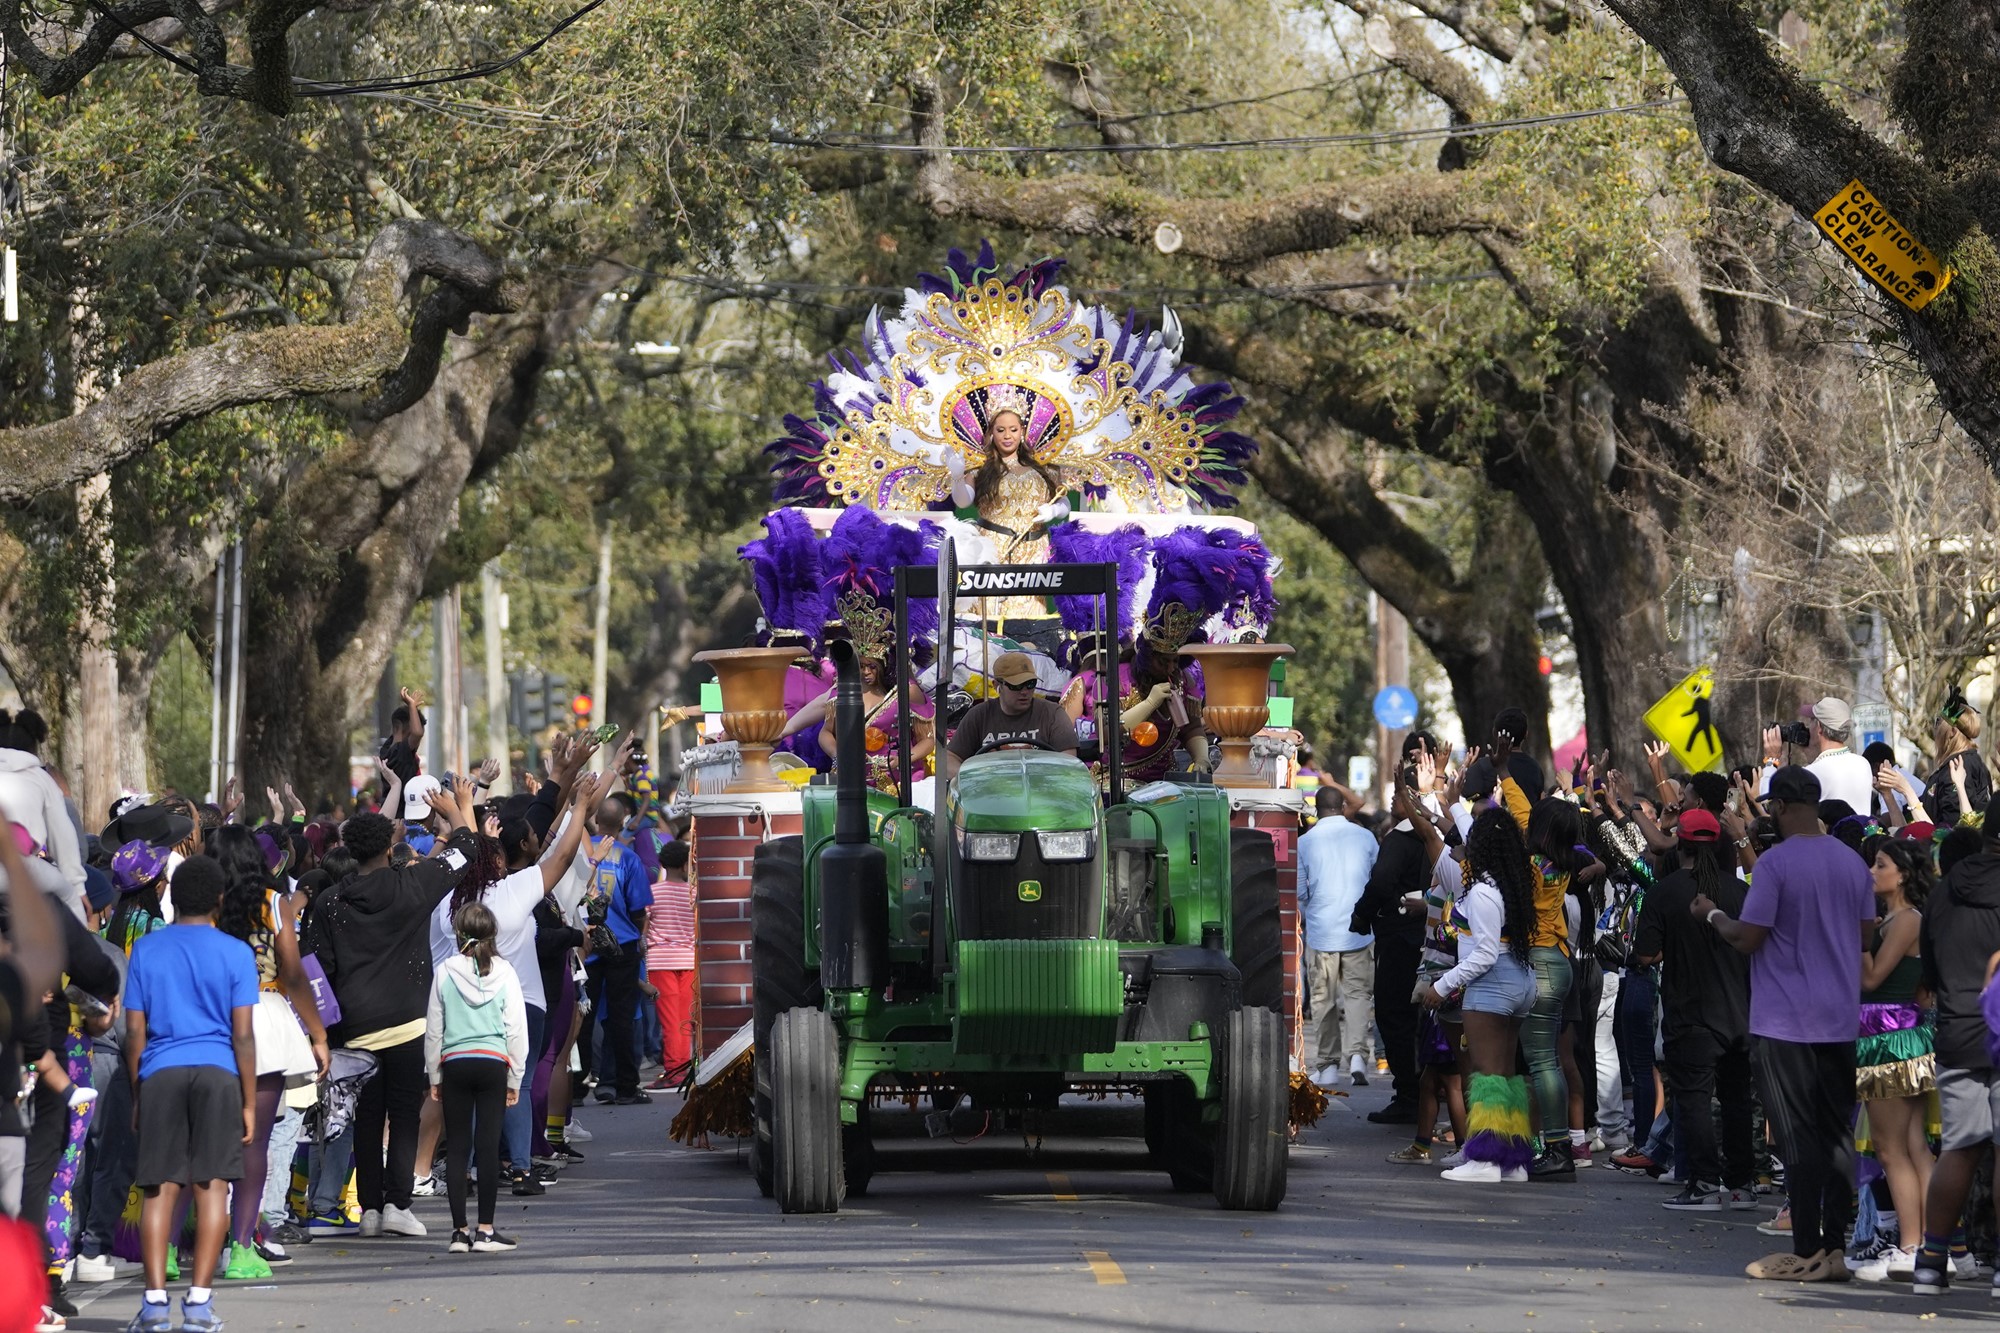 A woman in elaborate costume sits on the back of a parade float pulled by a tractor through the street. 